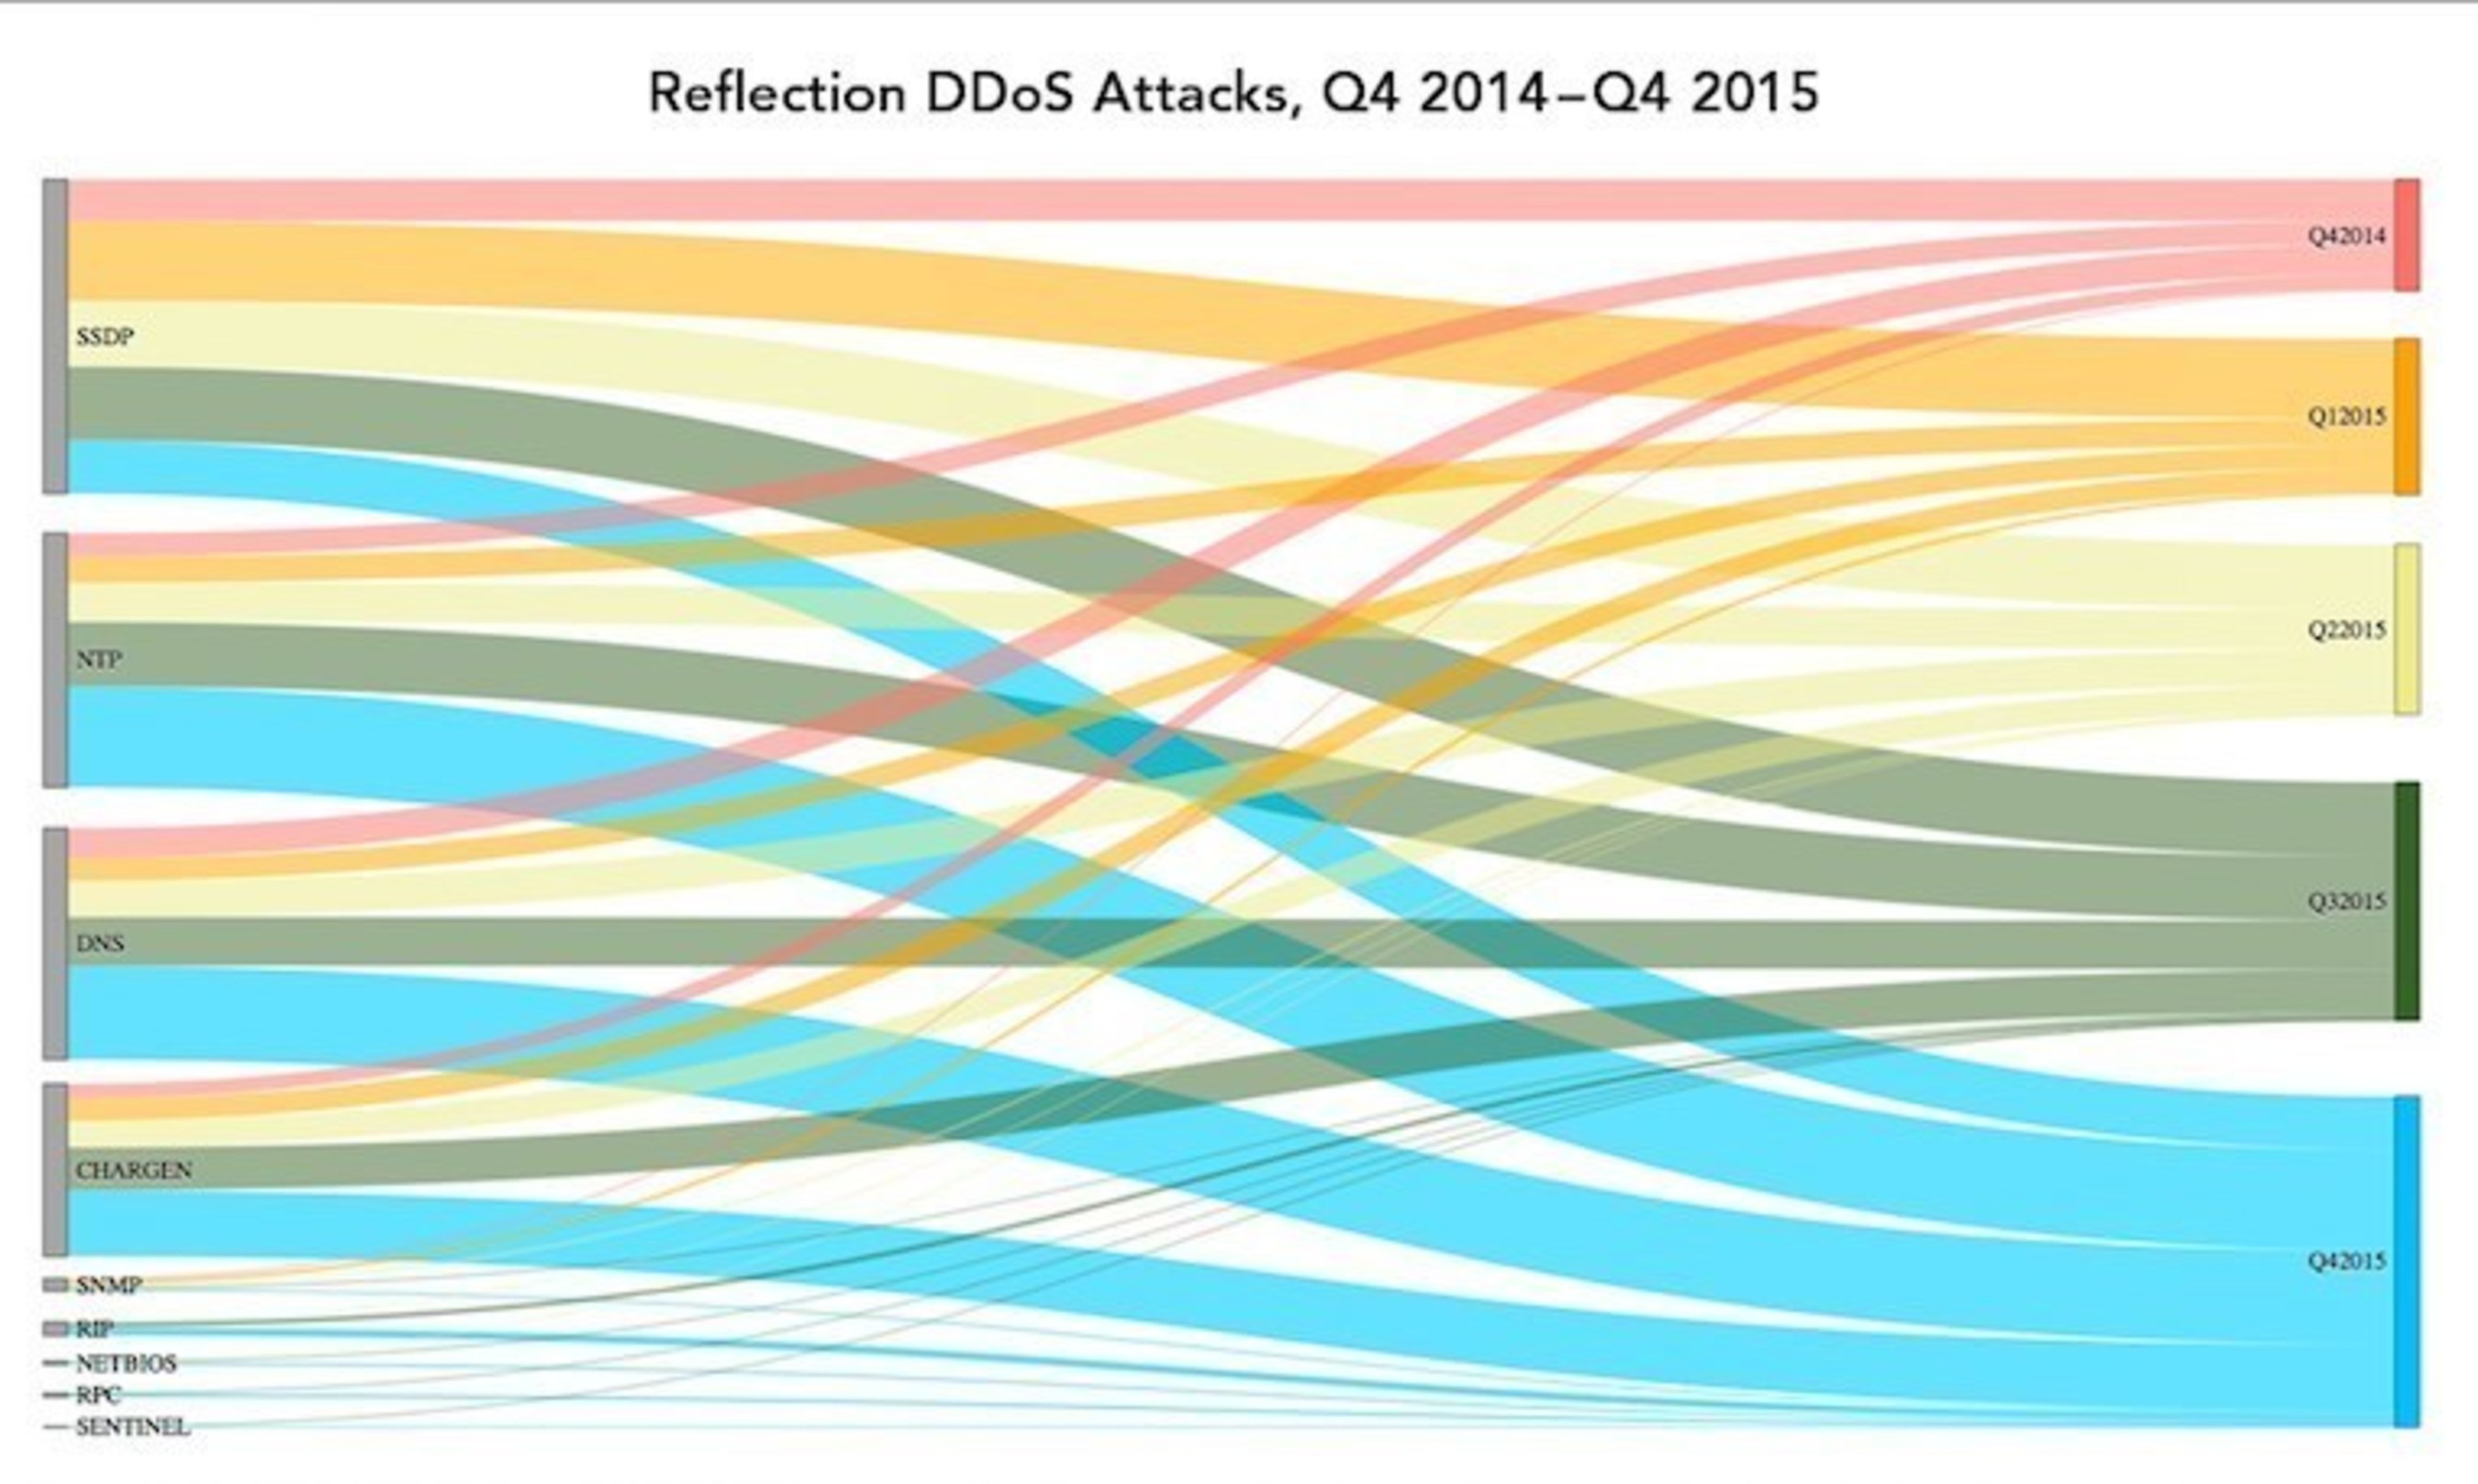 SSDP, NTP, DNS and CHARGEN have consistently been used as the most common reflection attack vectors, as can be seen on the left axis, and the use of reflection attacks has increased dramatically since Q4 2014, as shown on the right axis